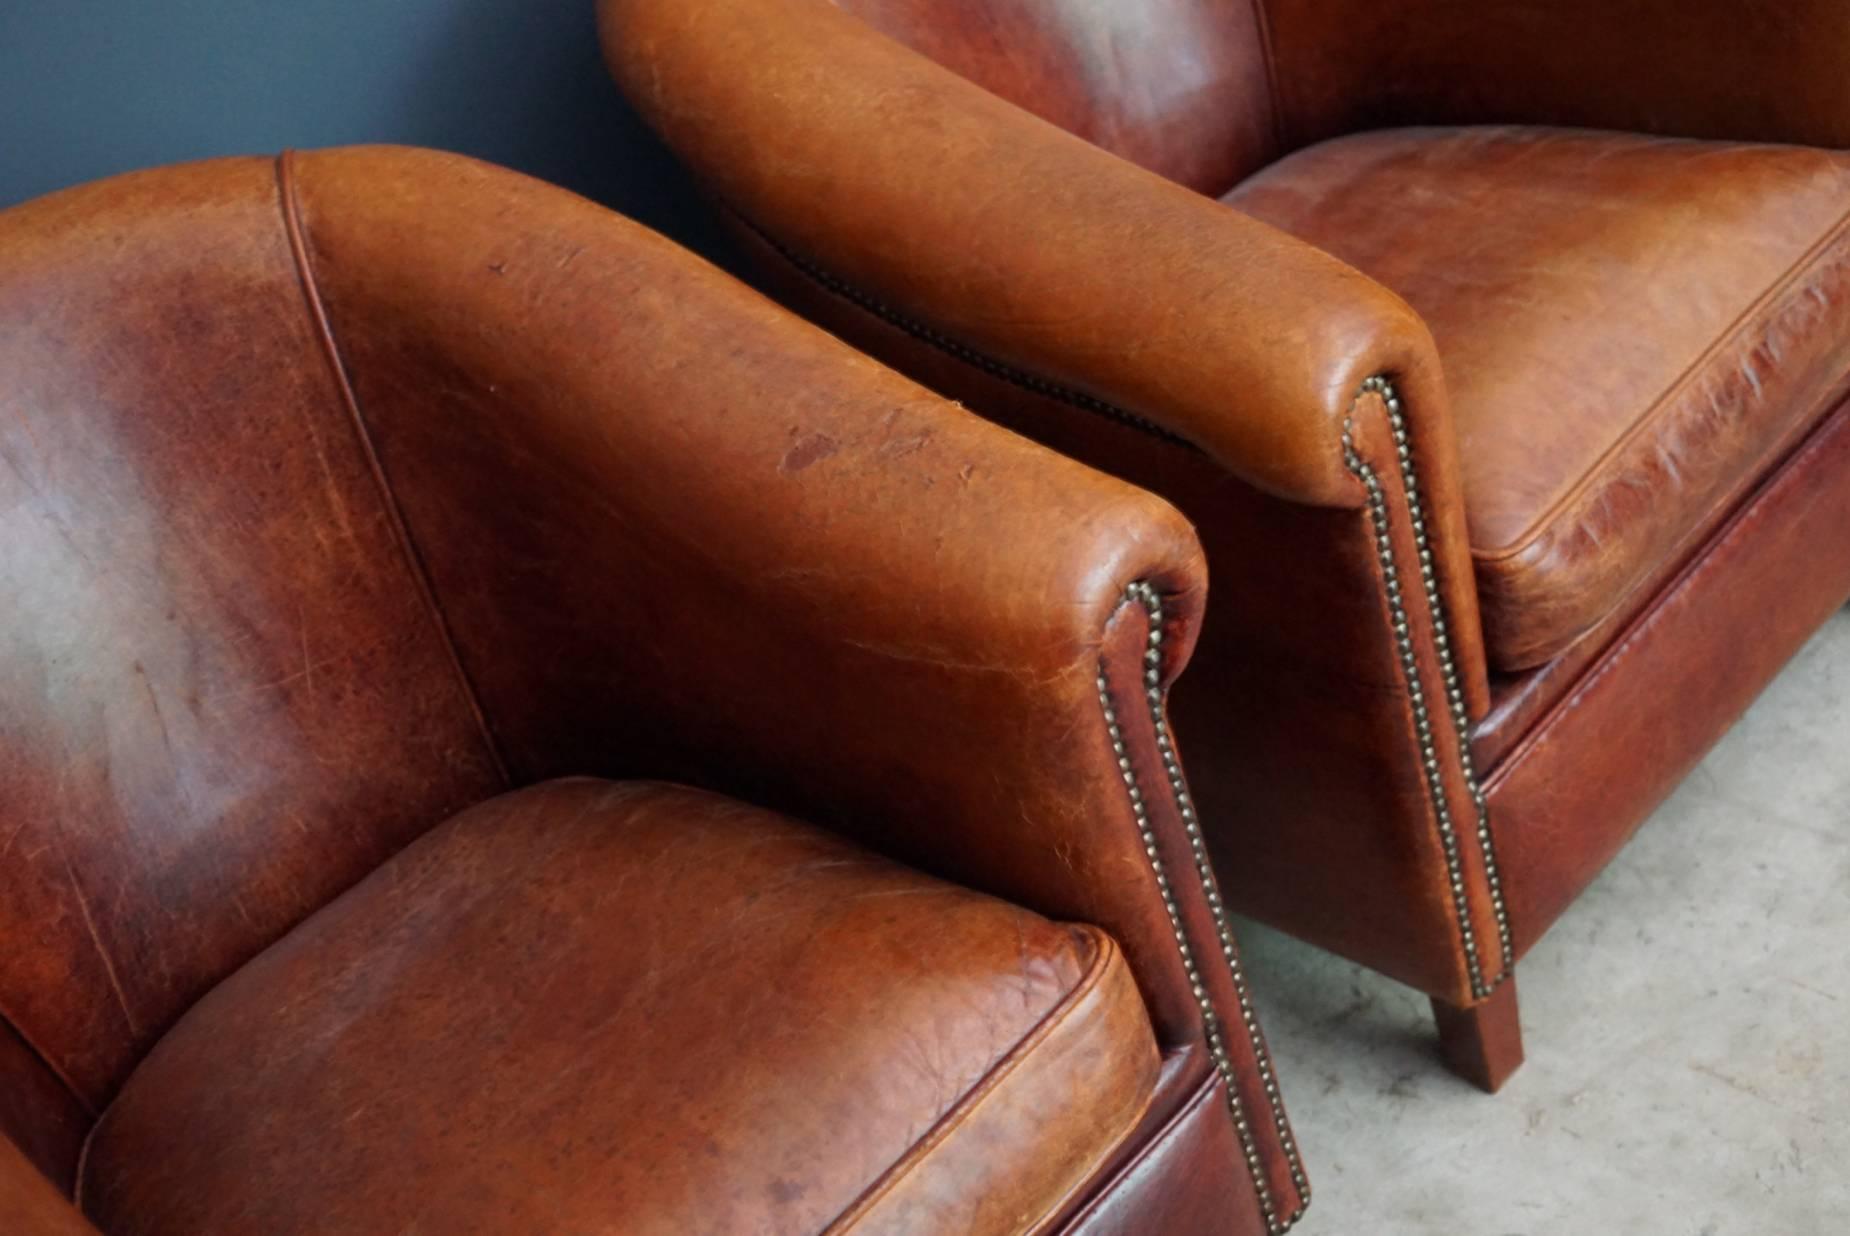 20th Century Vintage Dutch Cognac Leather Club Chairs, Set of Two